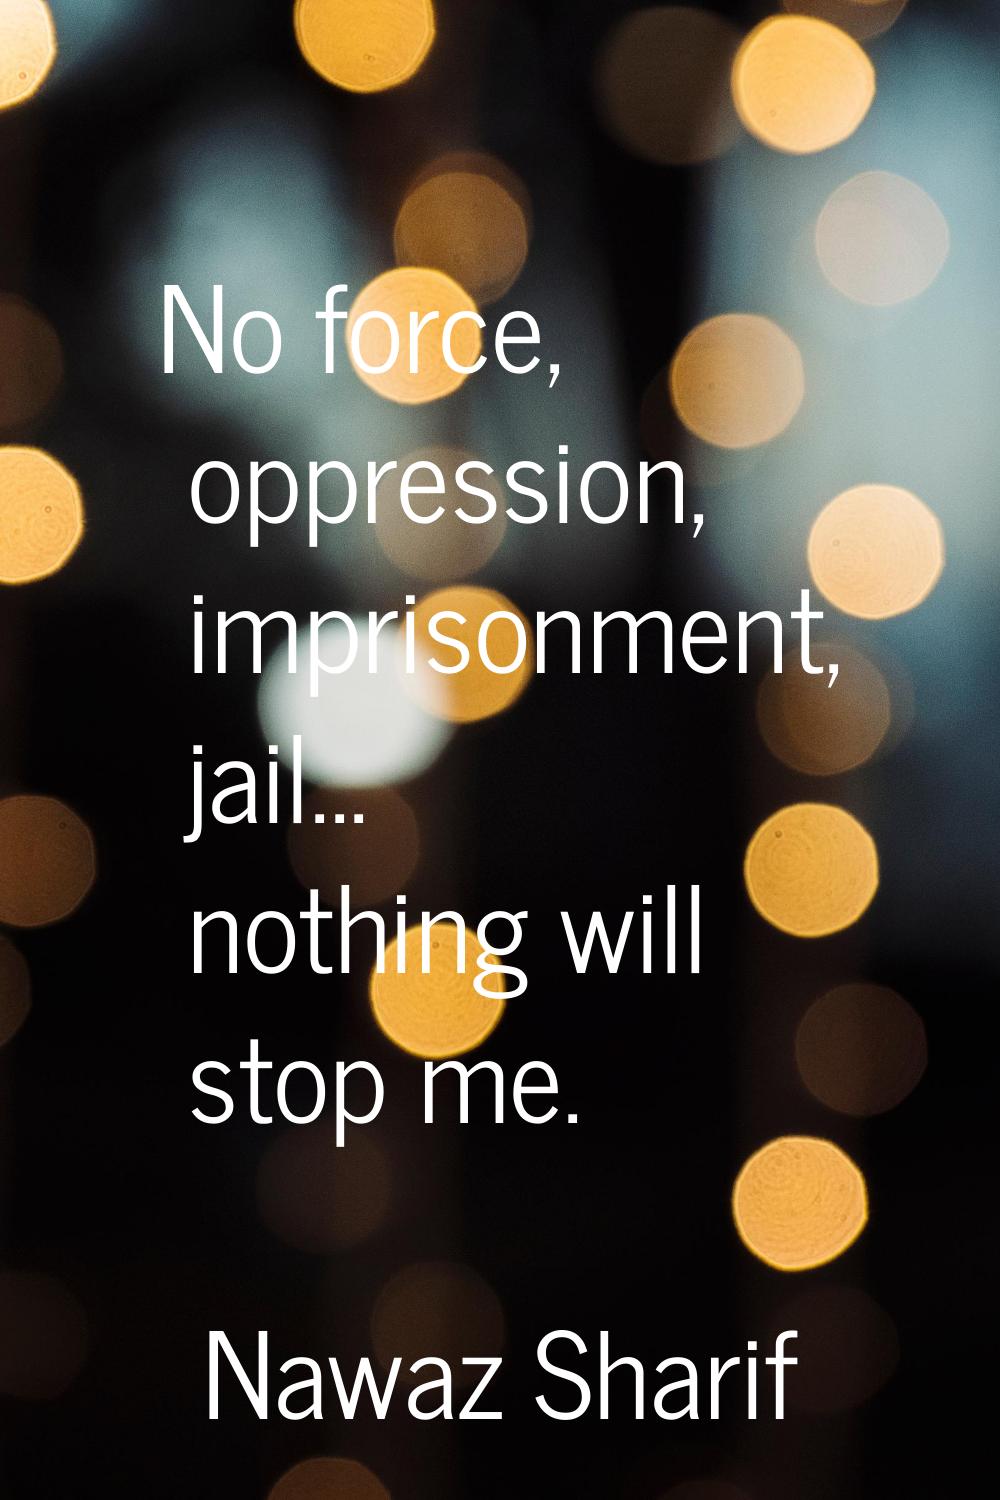 No force, oppression, imprisonment, jail... nothing will stop me.